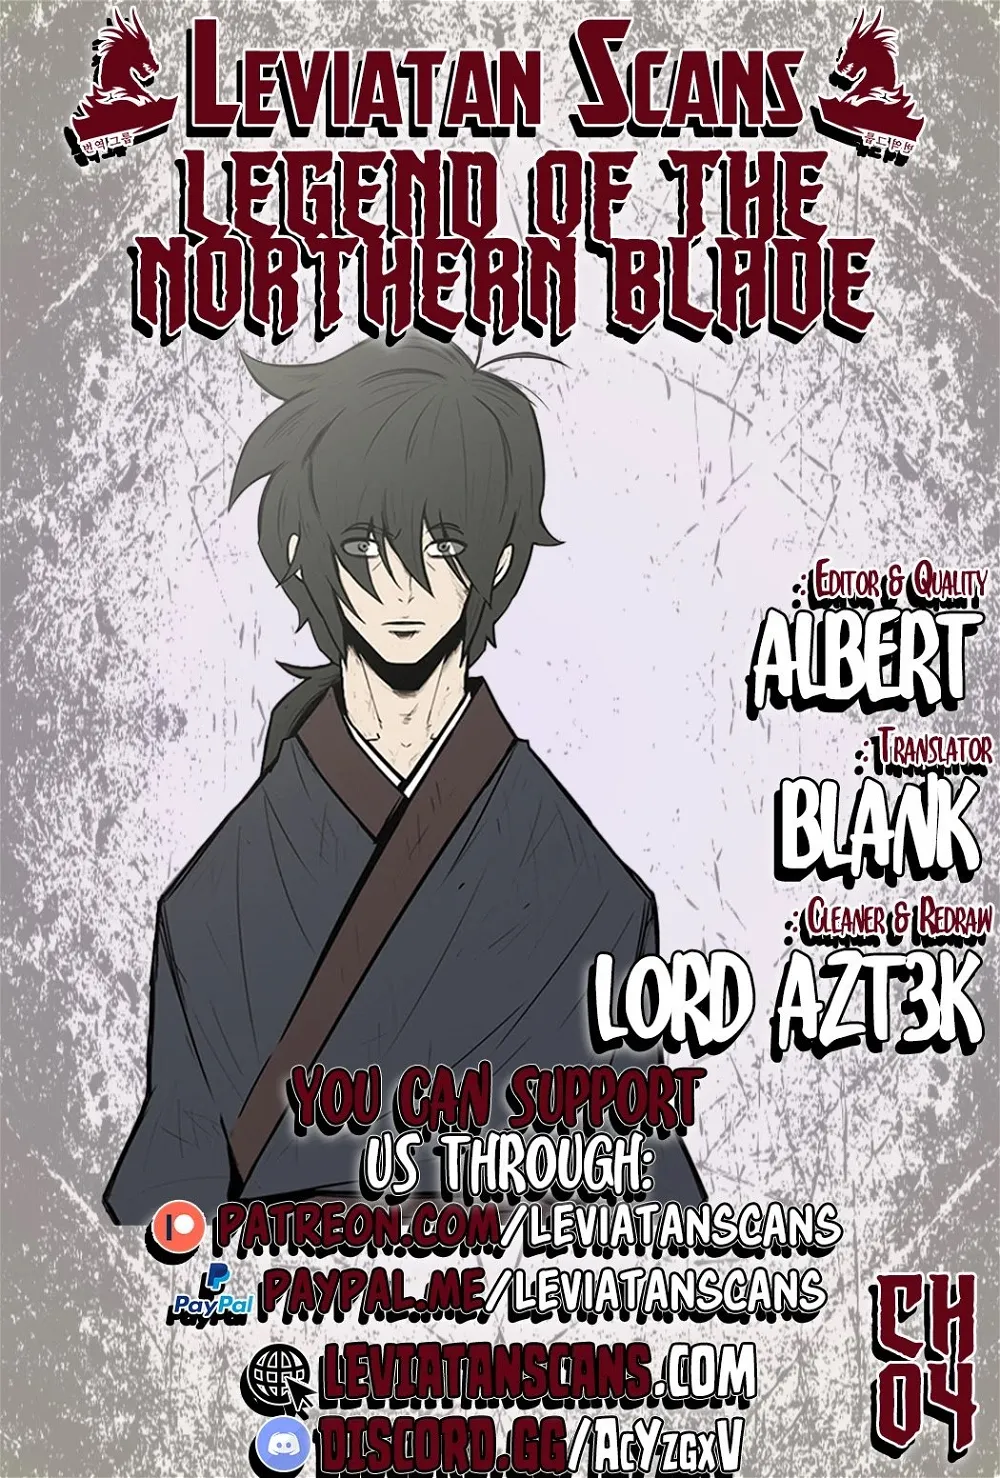 Legend of the northern blade chapter 114